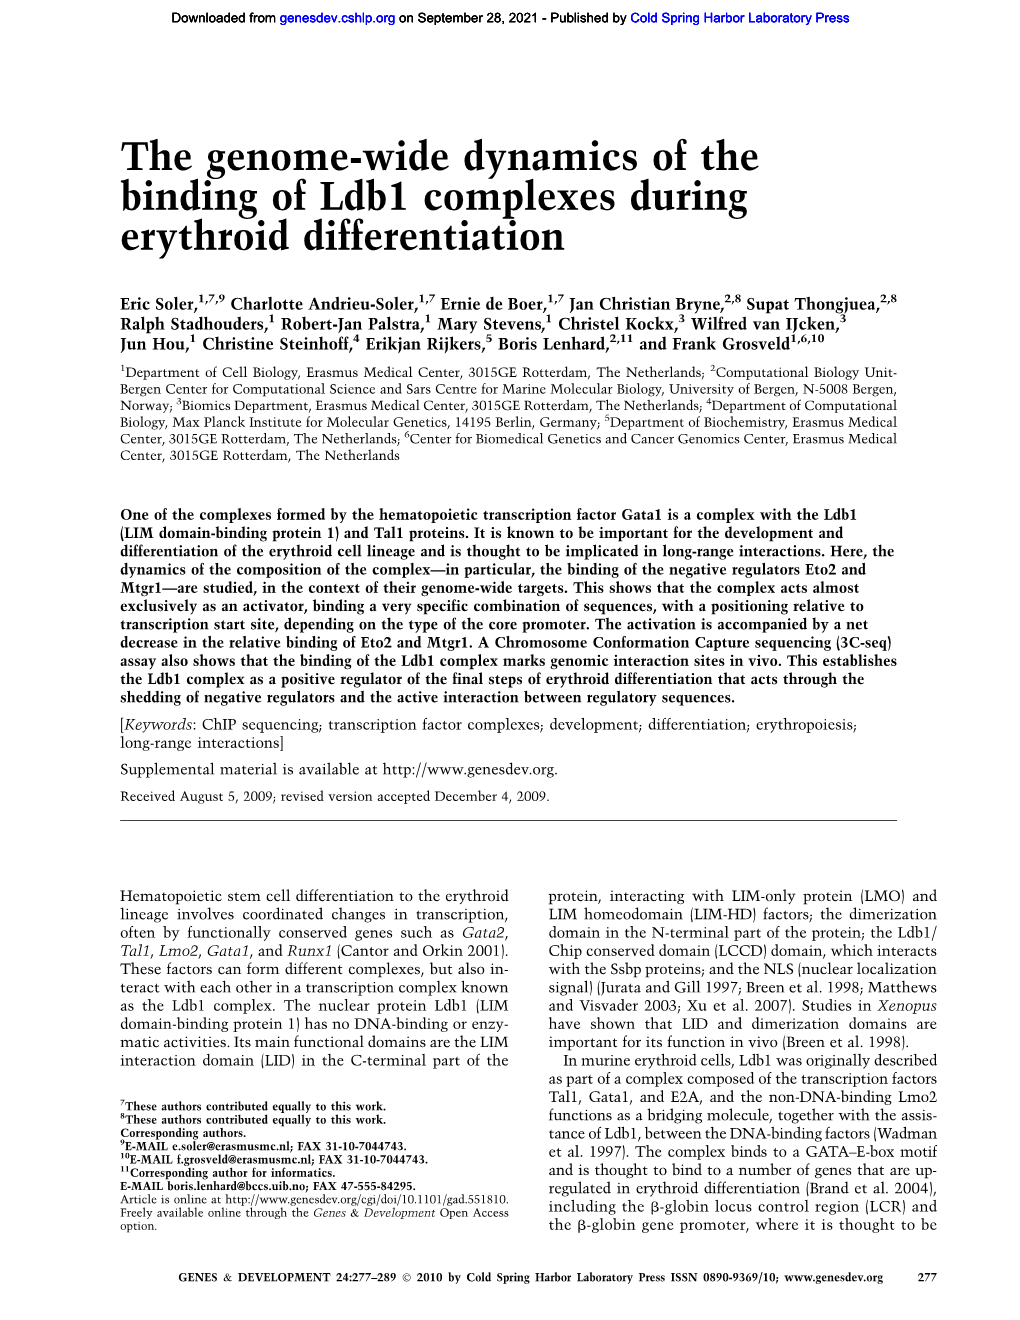 The Genome-Wide Dynamics of the Binding of Ldb1 Complexes During Erythroid Differentiation